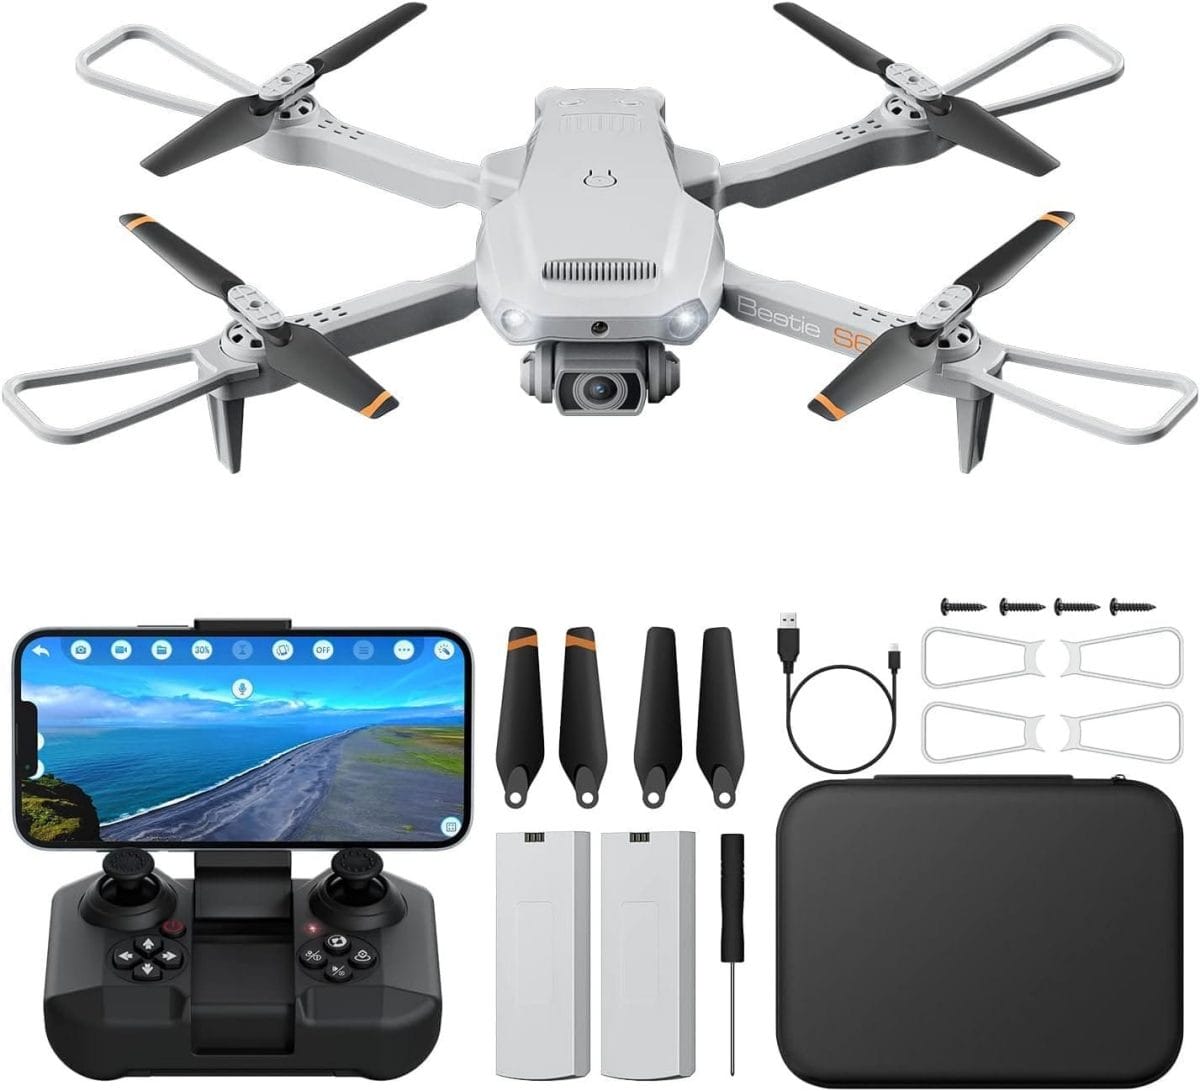 Drone with Camera for Adults 4K - ROVPRO Dual Camera S60 RC Quadcopter with APP Control - Obstacle Avoidance, Waypoint Fly, Altitude Hold, Follow Me, Roll Mode, Headless Mode (White)